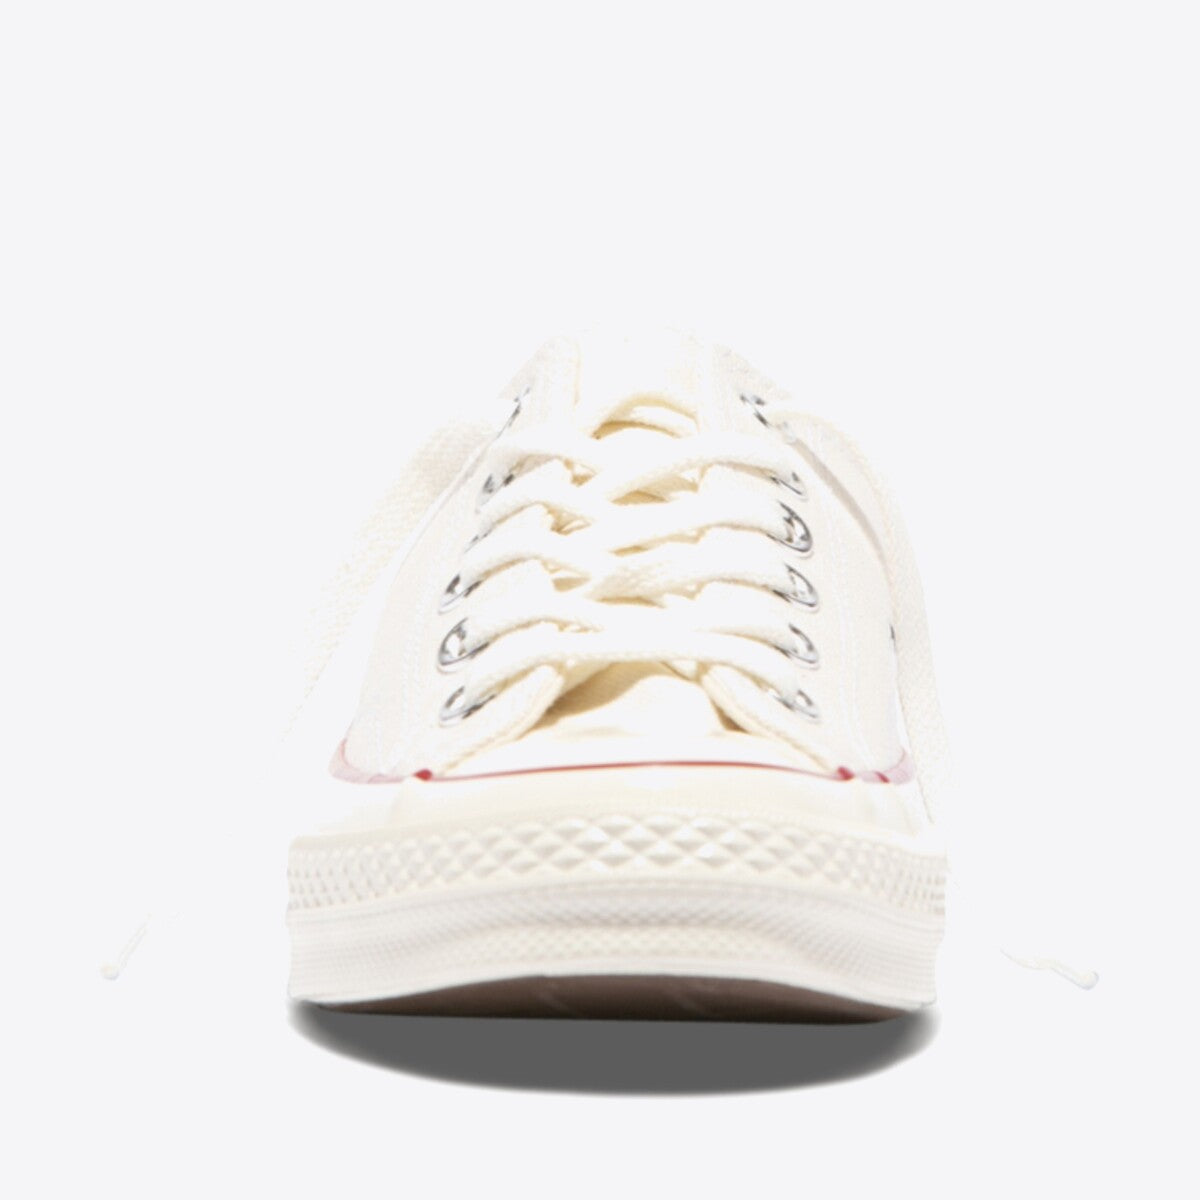 CONVERSE Chuck Taylor All Star 70 Canvas Low Parchment - Image 4